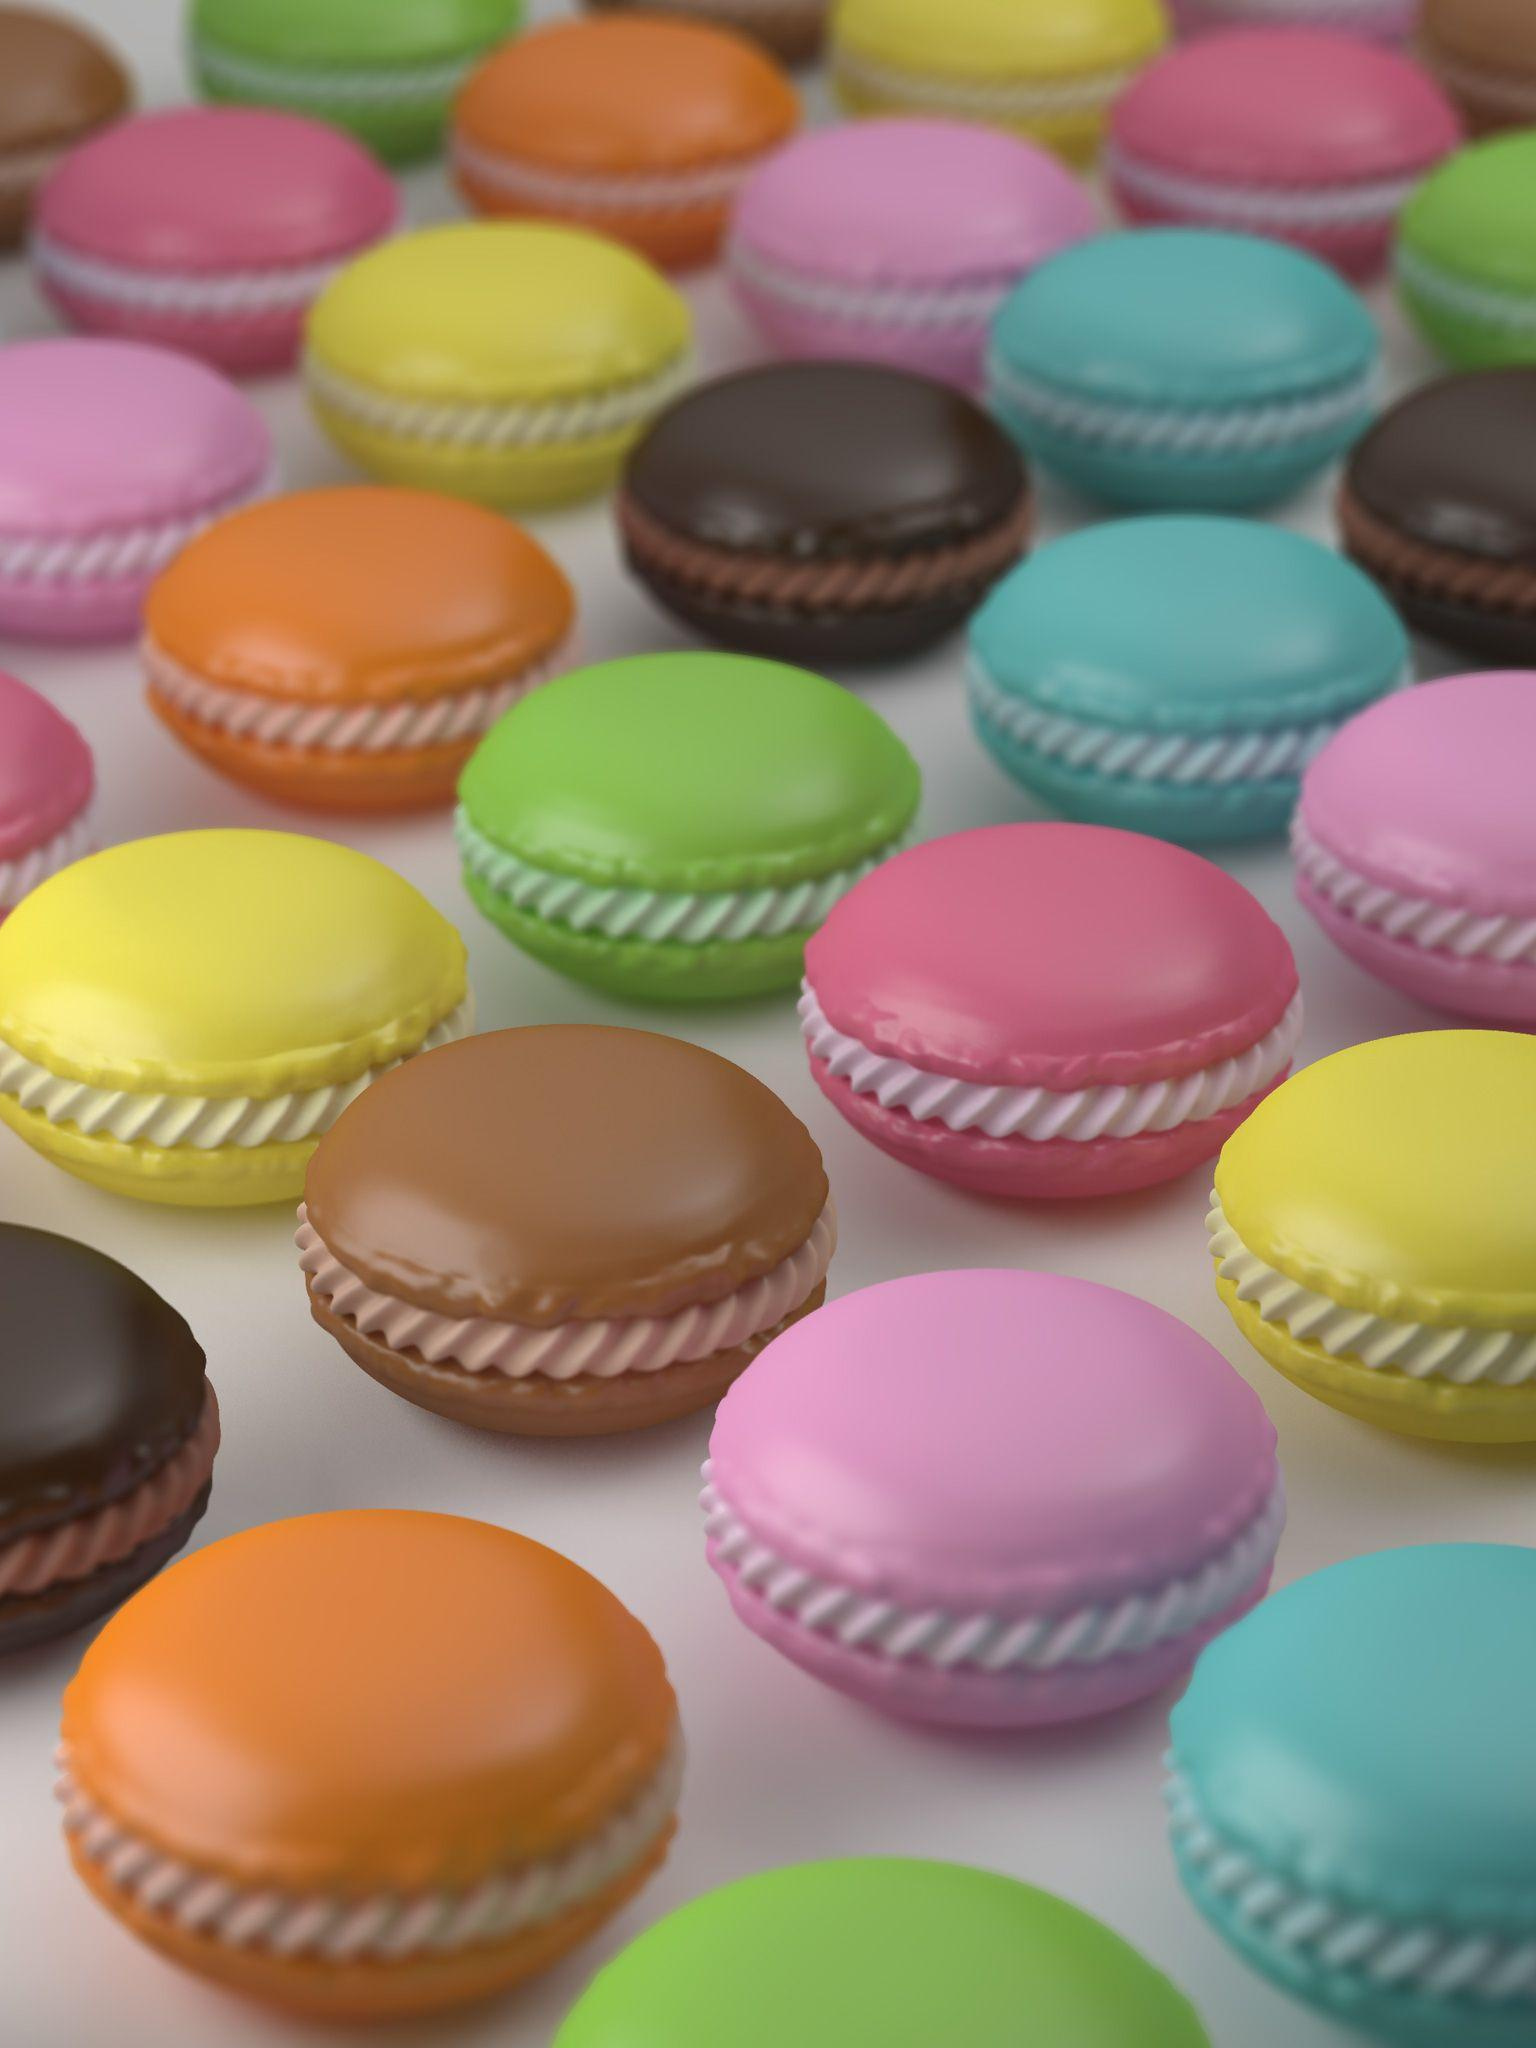 Macaron: Come in a variety of colors, flavors, and sizes, Baked goods. 1540x2050 HD Wallpaper.